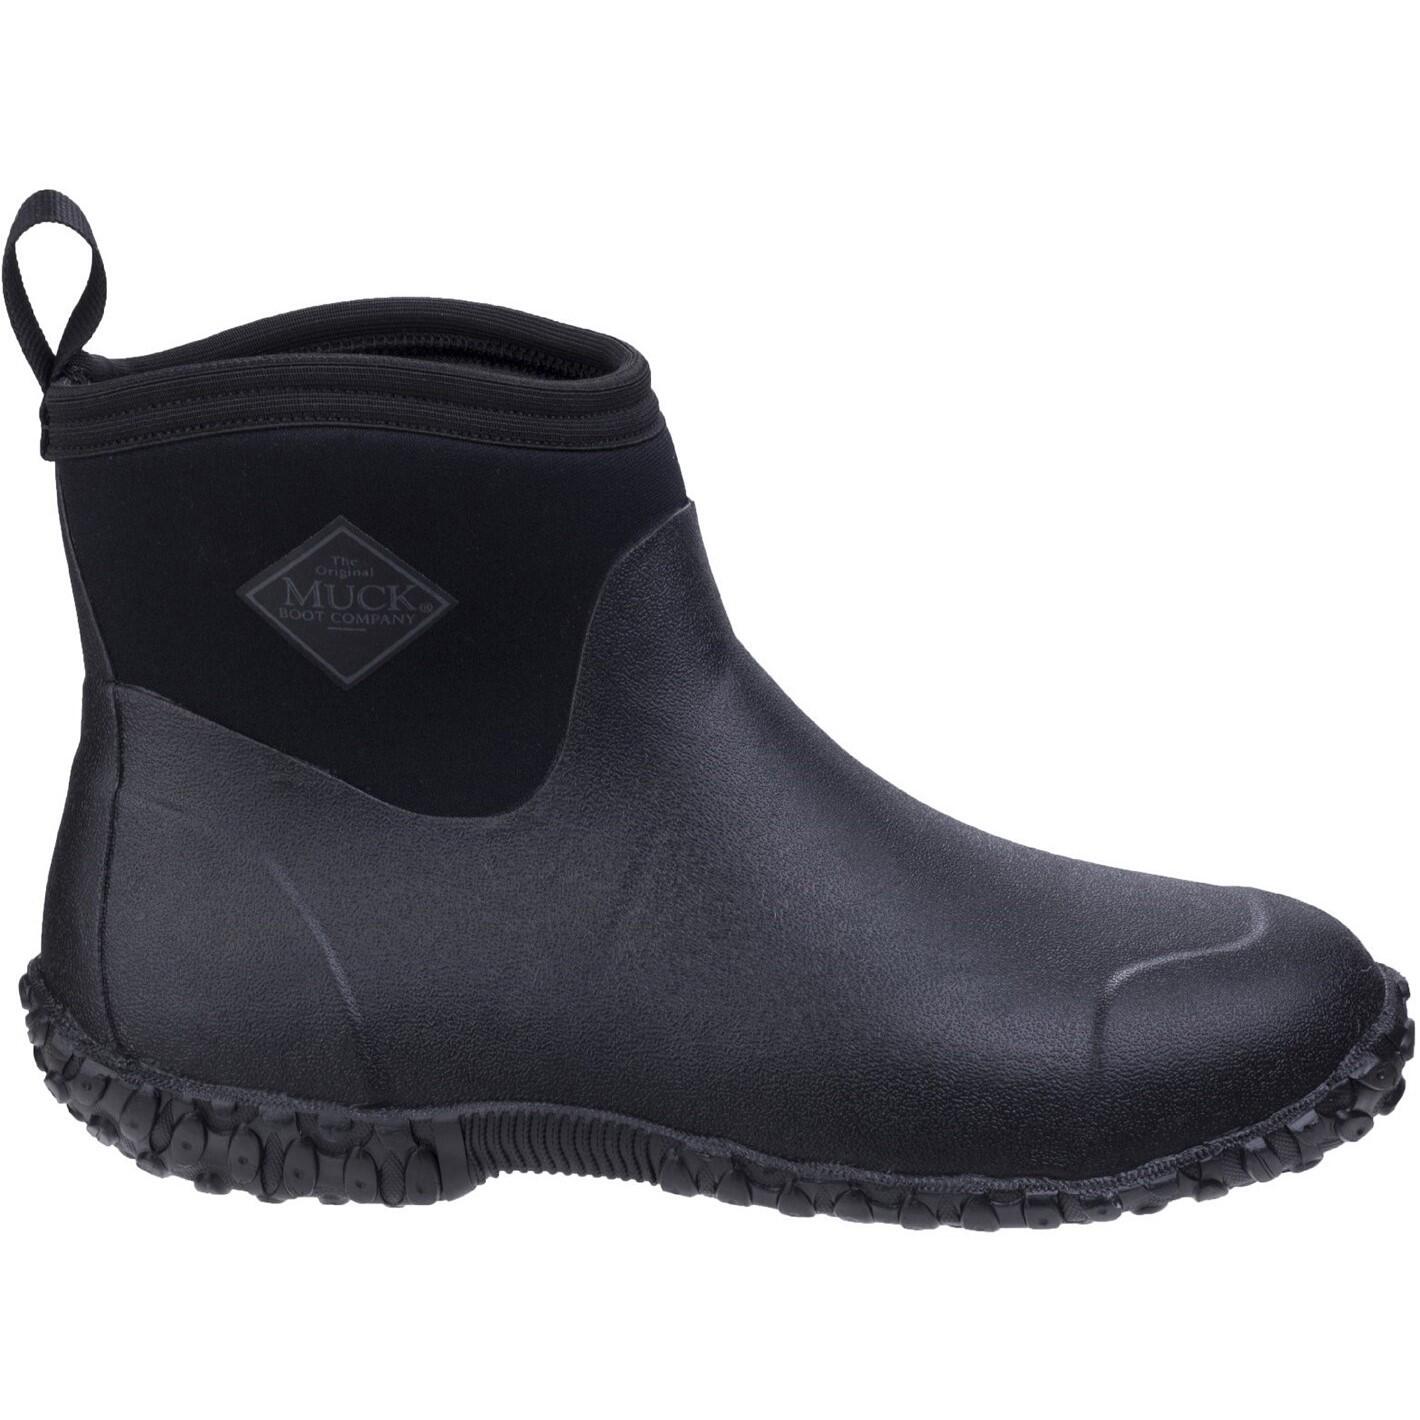 Muckster II Ankle Textile/Weather Wellingtons BLACK 1/3